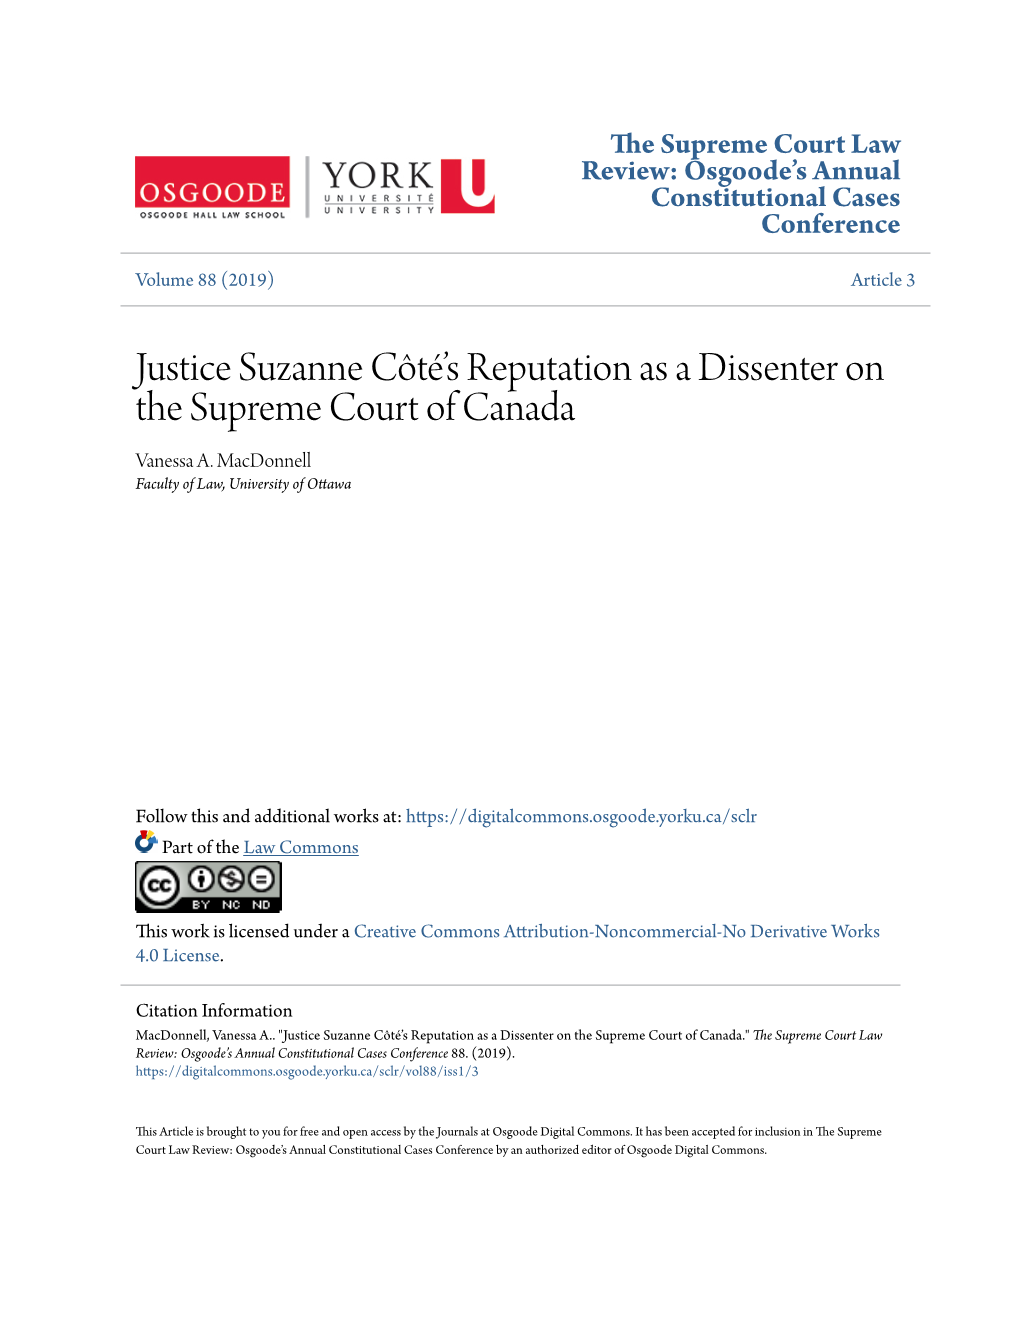 Justice Suzanne Côté's Reputation As a Dissenter on the Supreme Court